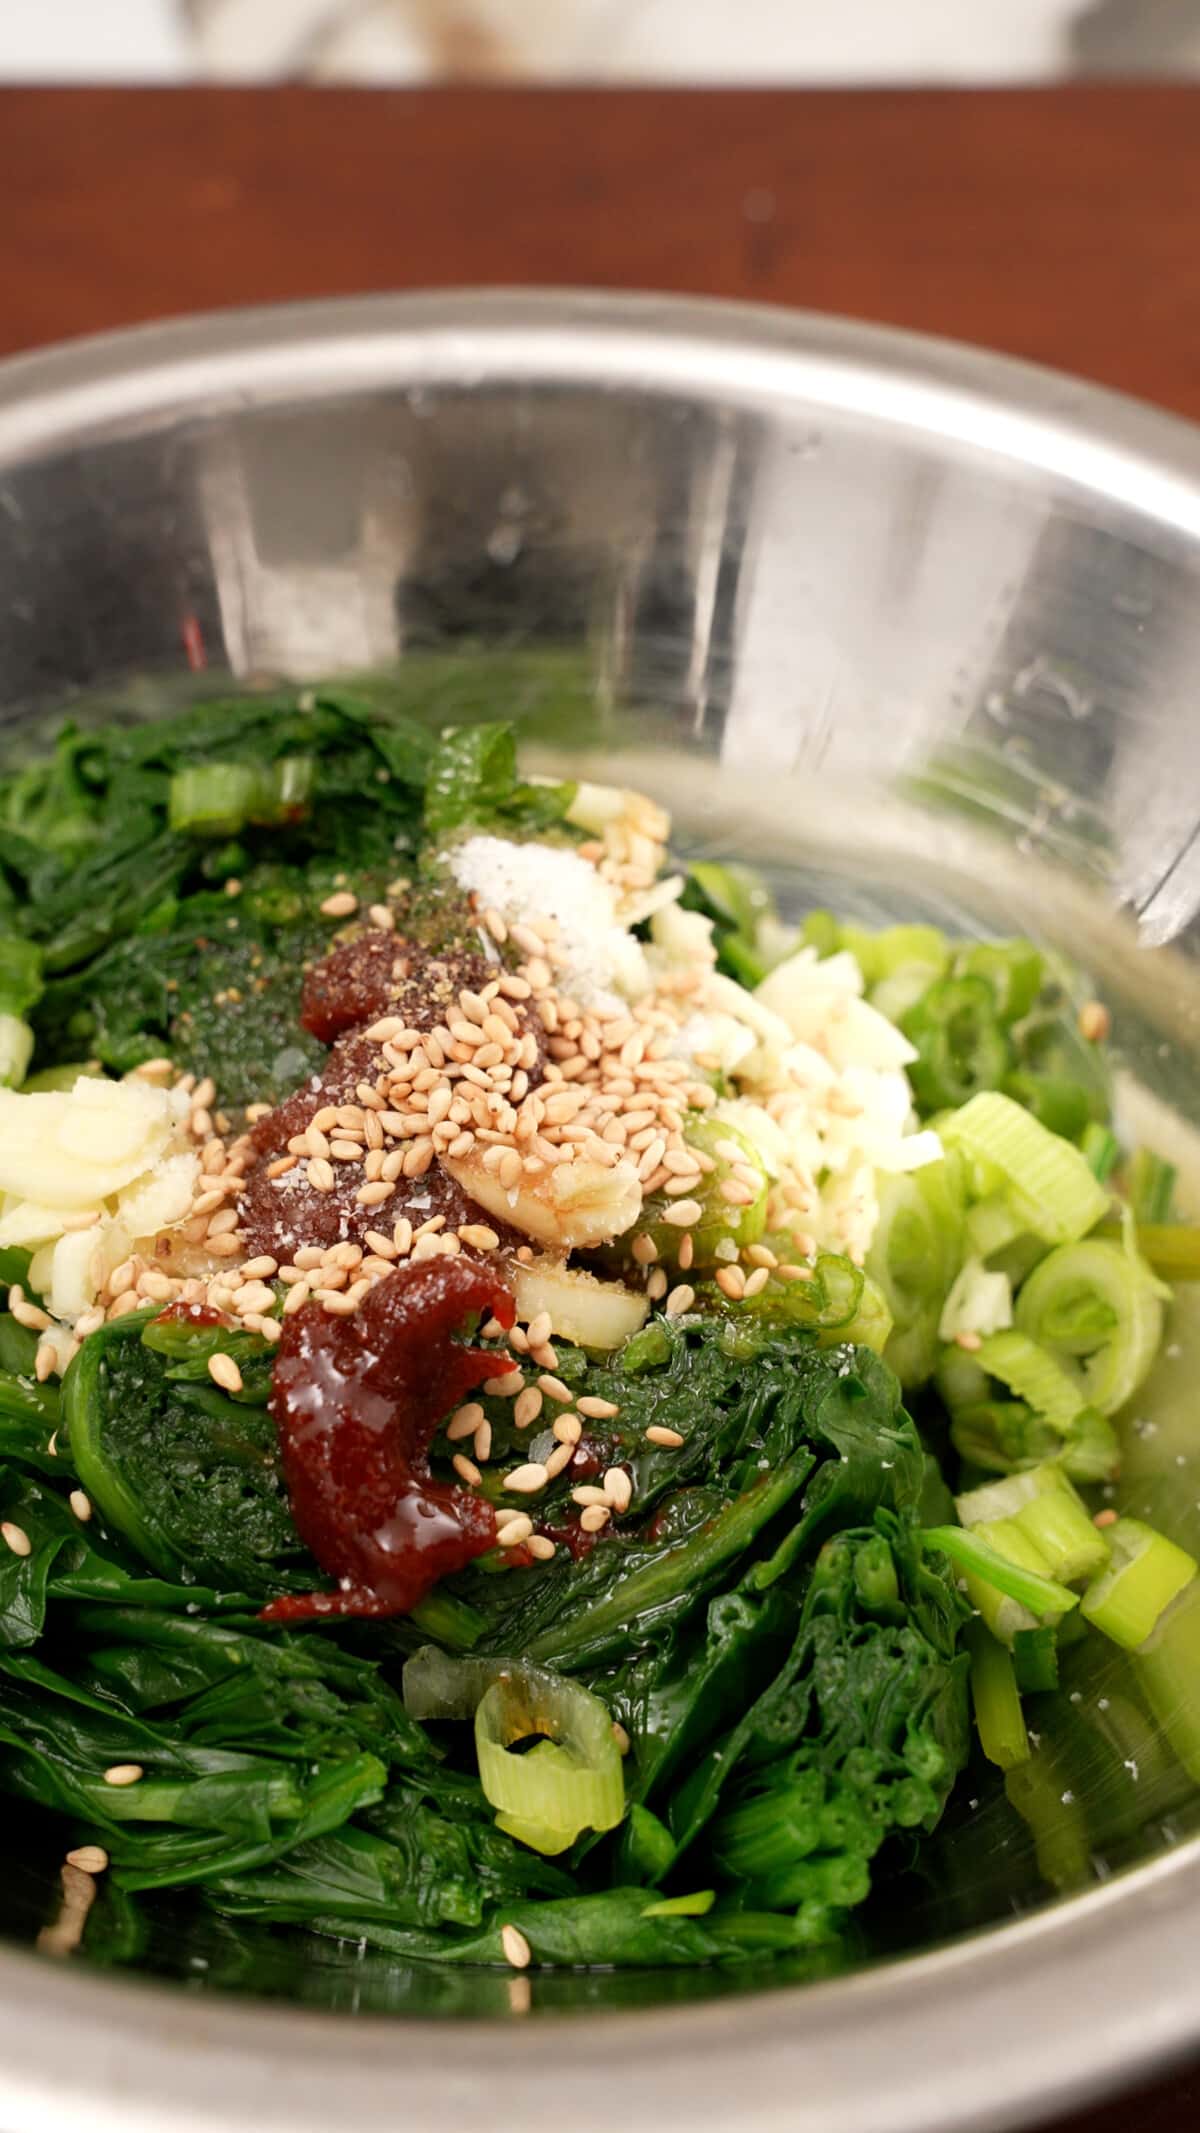 Spinach in a metal bowl marinating to make Spicy Korean spinach side dish.